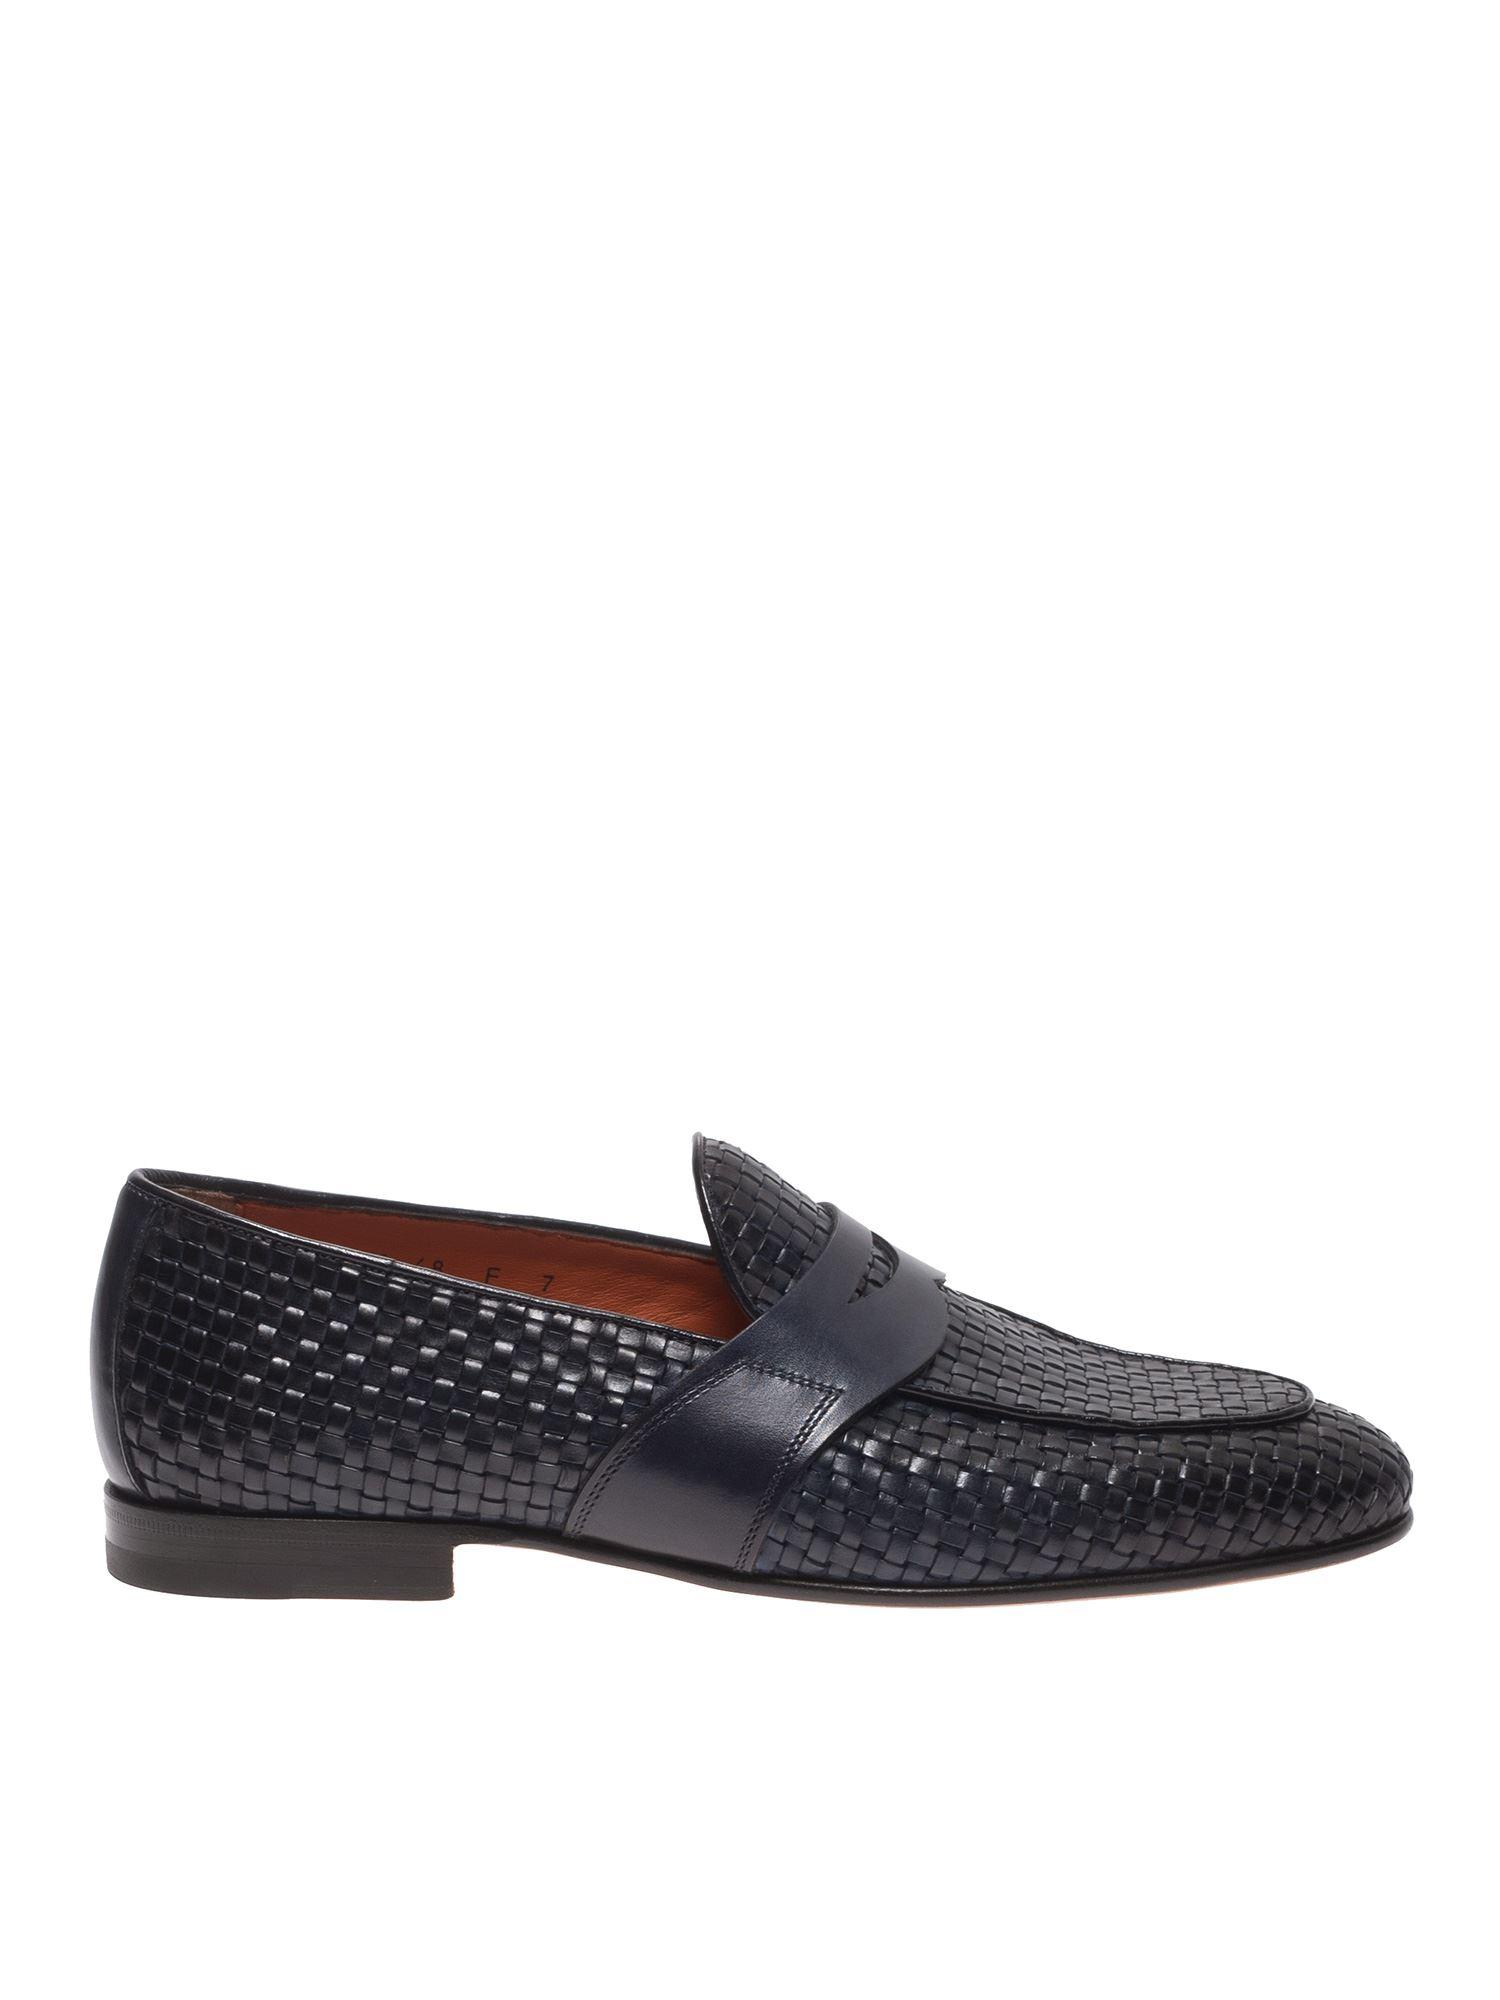 Santoni Woven Leather Loafers In Blue for Men - Lyst